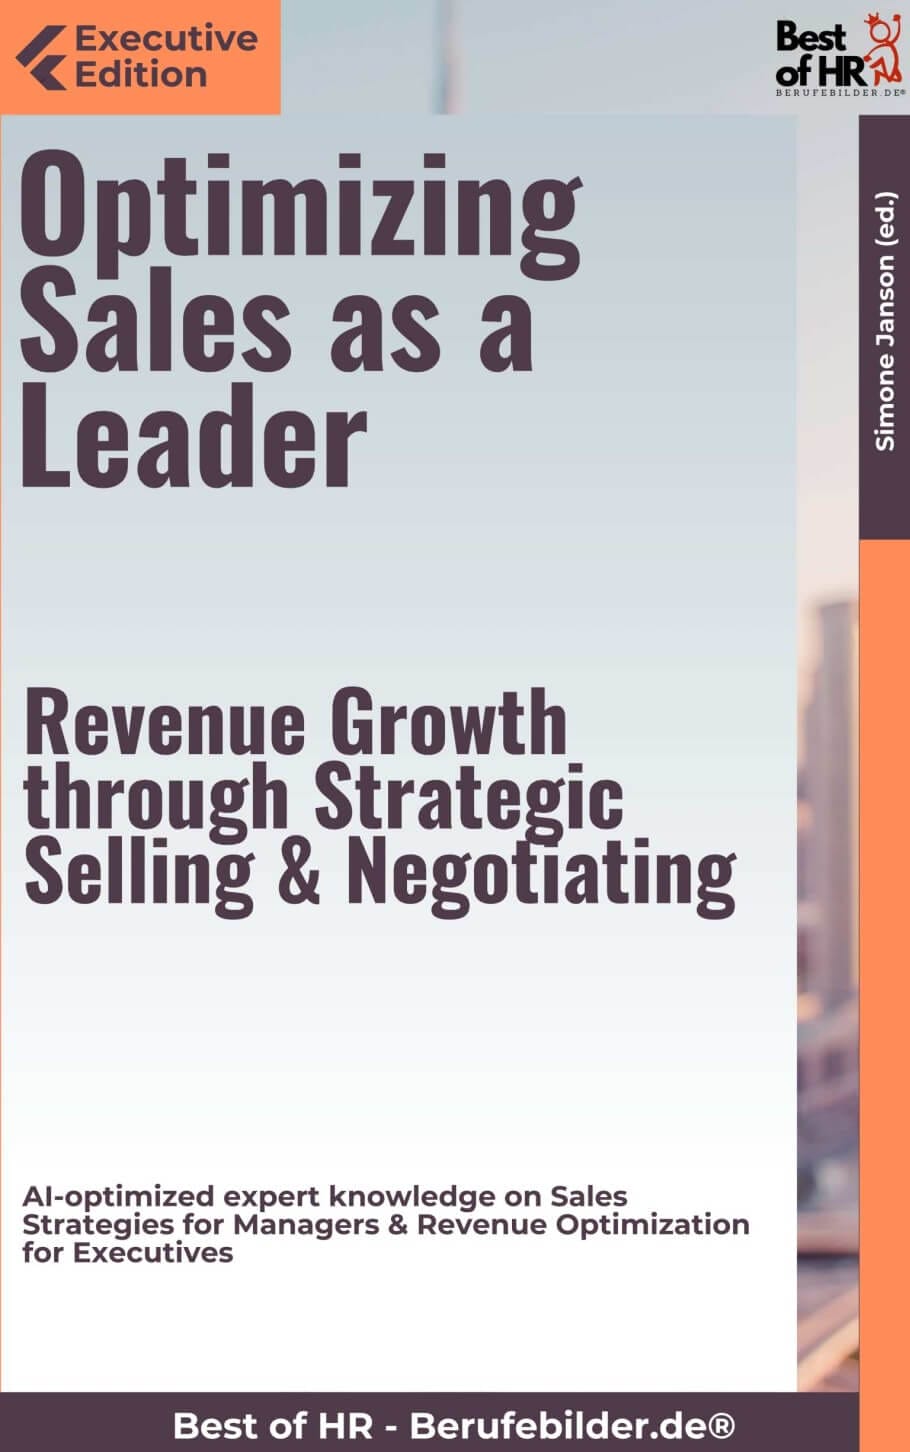 Optimizing Sales as a Leader – Revenue Growth through Strategic Selling & Negotiating (Engl. Version)